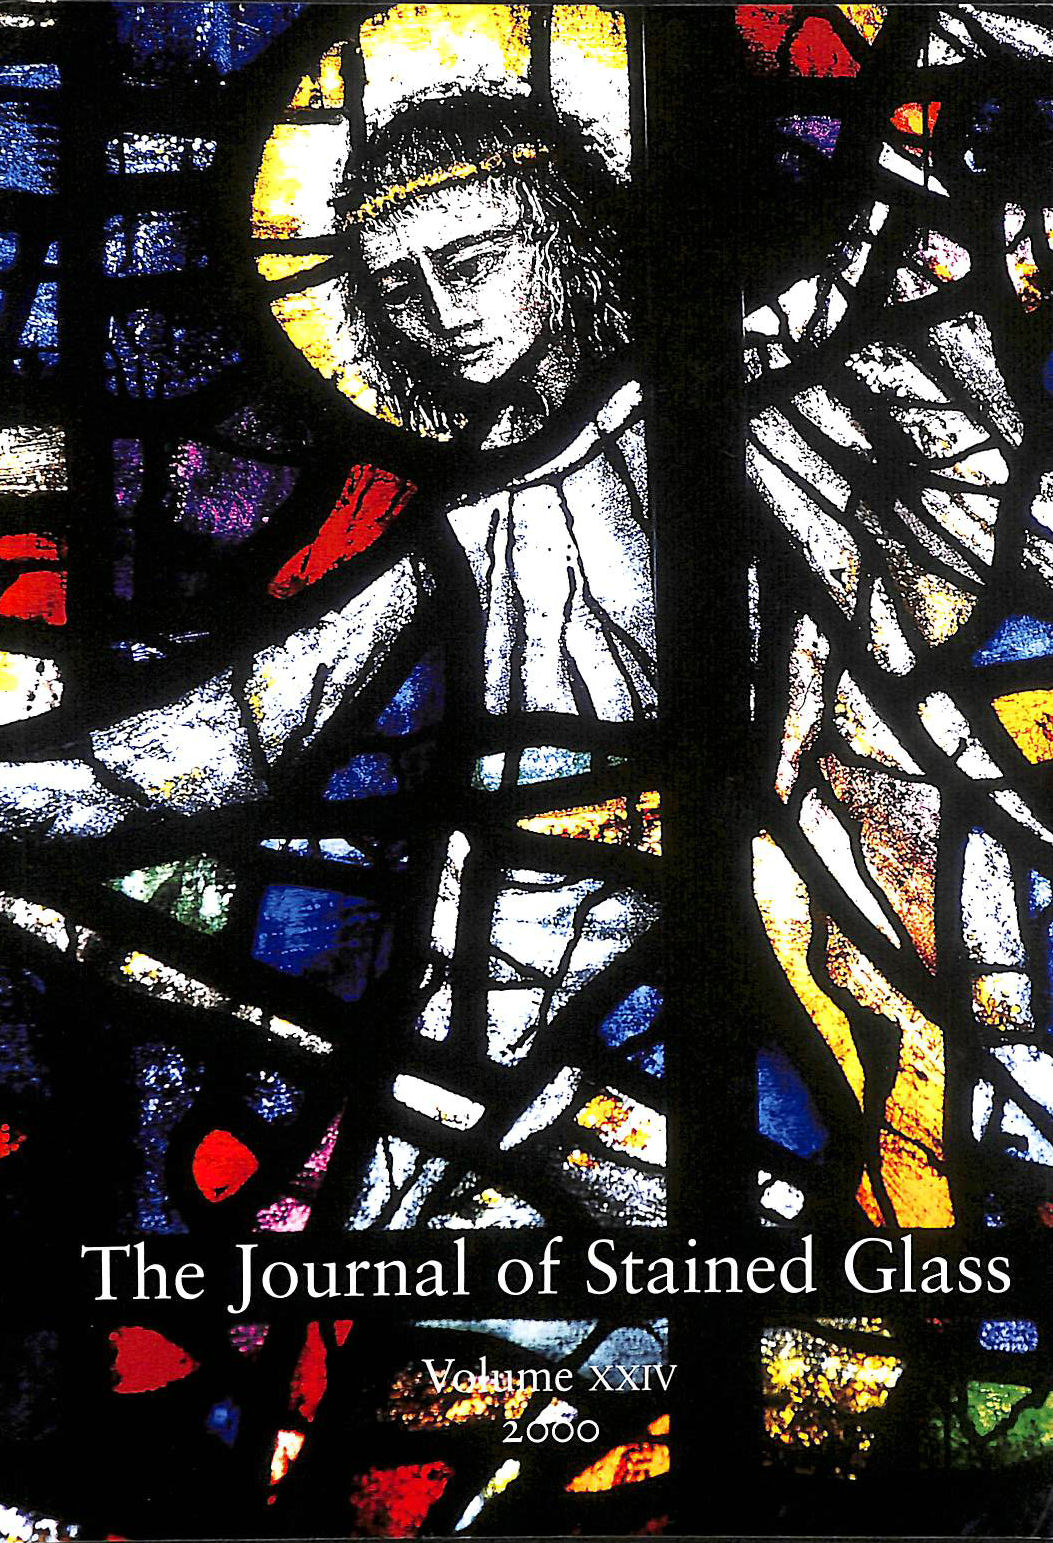 SANDRA COLEY (ED) - The Journal of Stained Glass Volume XXIV